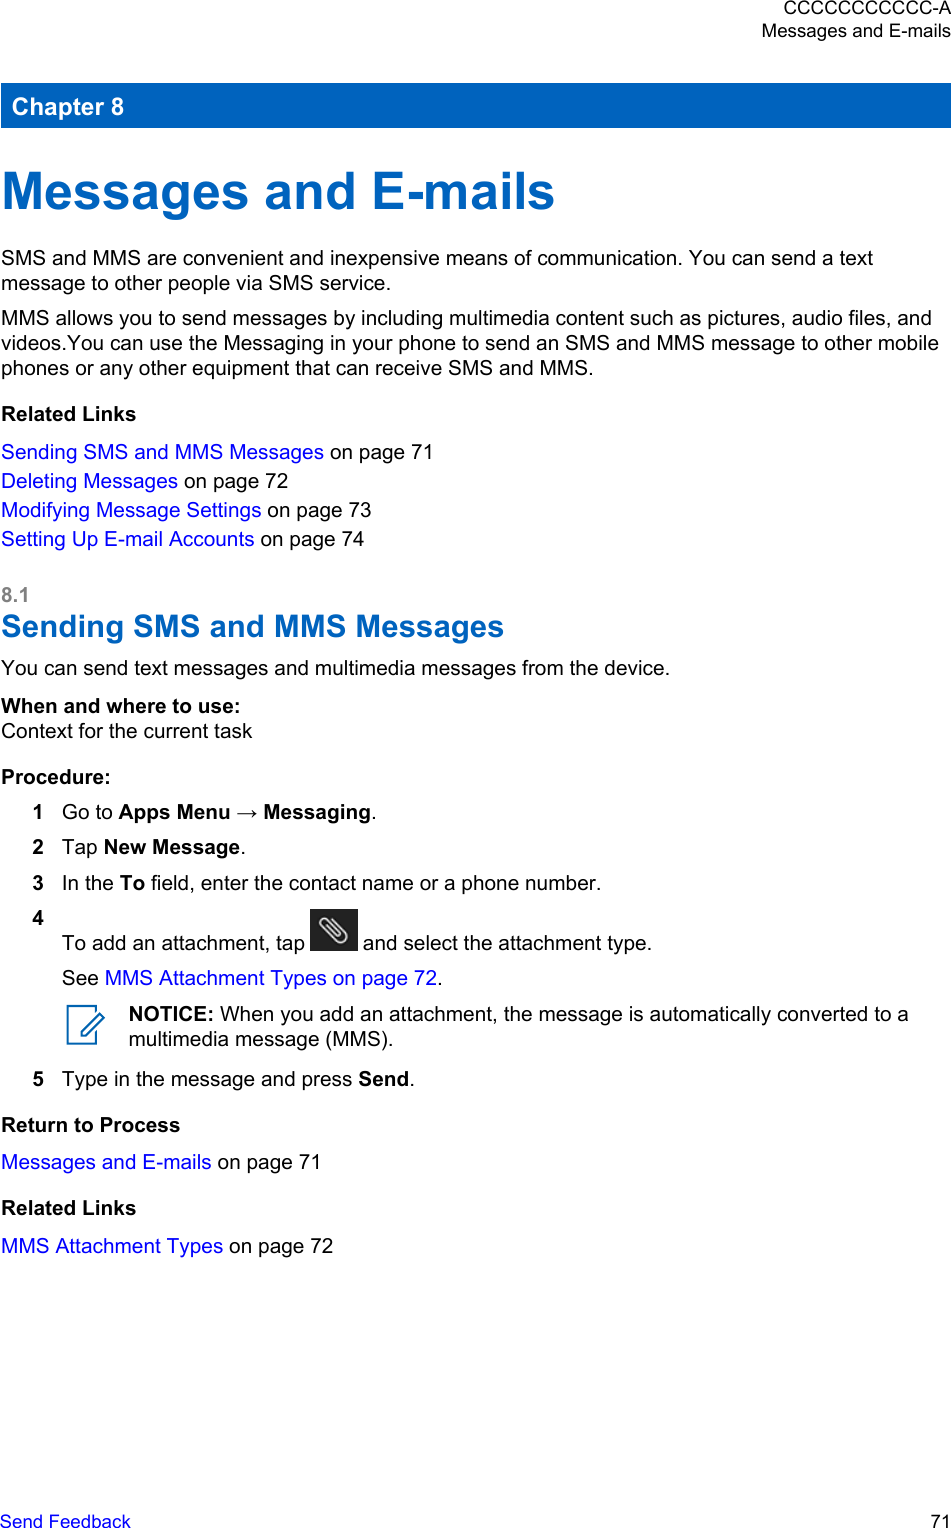 Chapter 8Messages and E-mailsSMS and MMS are convenient and inexpensive means of communication. You can send a textmessage to other people via SMS service.MMS allows you to send messages by including multimedia content such as pictures, audio files, andvideos.You can use the Messaging in your phone to send an SMS and MMS message to other mobilephones or any other equipment that can receive SMS and MMS.Related LinksSending SMS and MMS Messages on page 71Deleting Messages on page 72Modifying Message Settings on page 73Setting Up E-mail Accounts on page 748.1Sending SMS and MMS MessagesYou can send text messages and multimedia messages from the device.When and where to use:Context for the current taskProcedure:1Go to Apps Menu → Messaging.2Tap New Message.3In the To field, enter the contact name or a phone number.4To add an attachment, tap   and select the attachment type.See MMS Attachment Types on page 72.NOTICE: When you add an attachment, the message is automatically converted to amultimedia message (MMS).5Type in the message and press Send.Return to ProcessMessages and E-mails on page 71Related LinksMMS Attachment Types on page 72CCCCCCCCCCC-AMessages and E-mailsSend Feedback   71